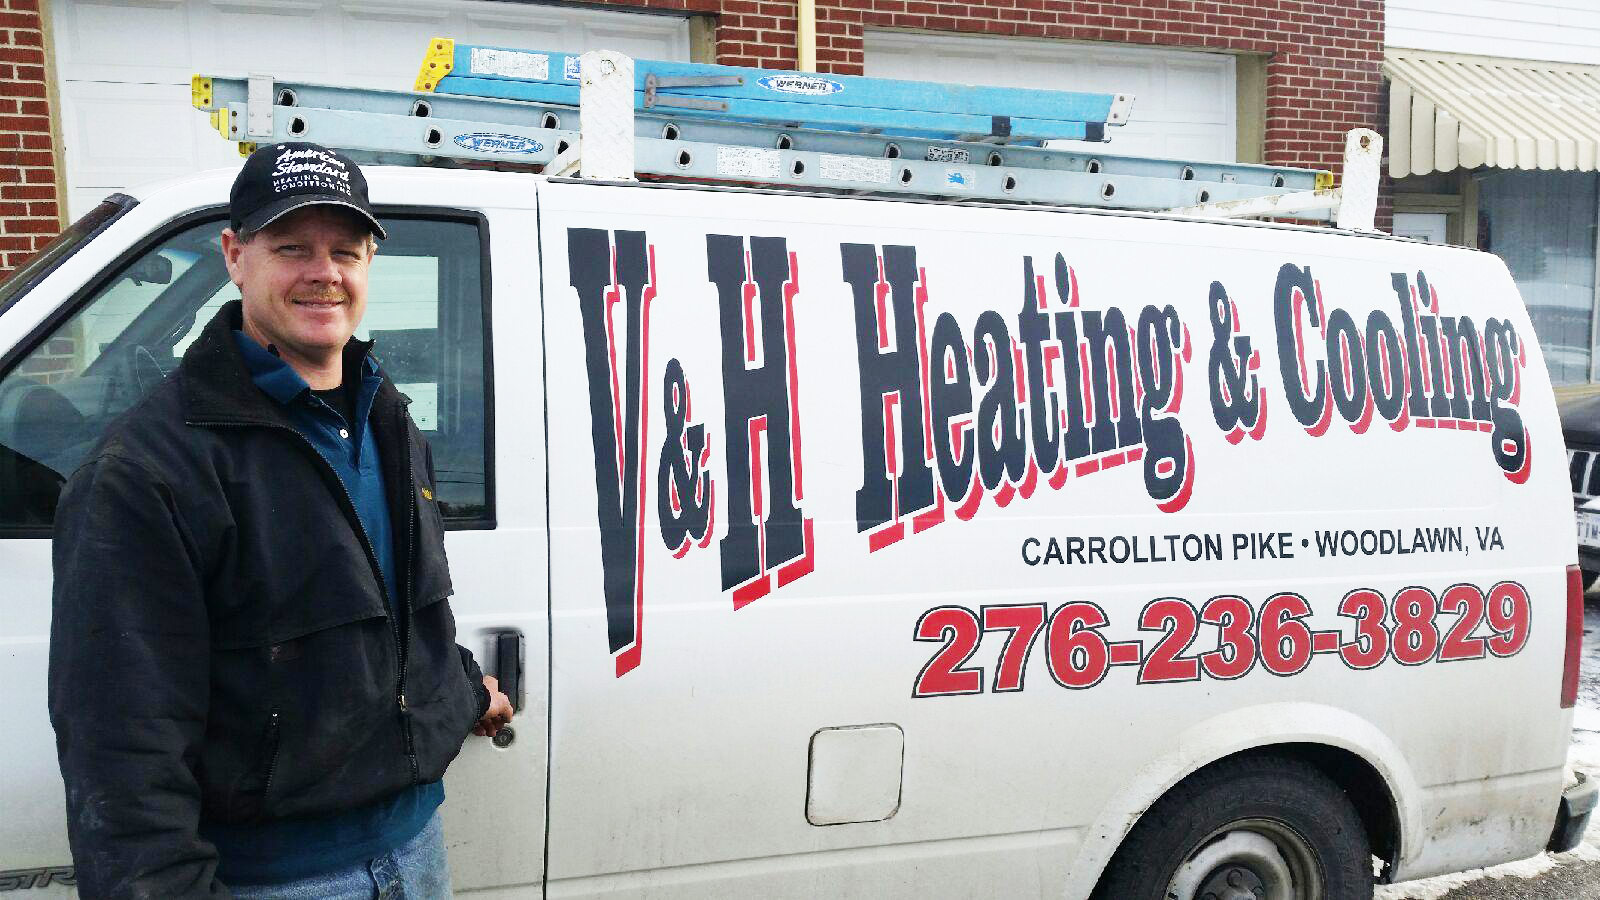 V & H Heating and Cooling